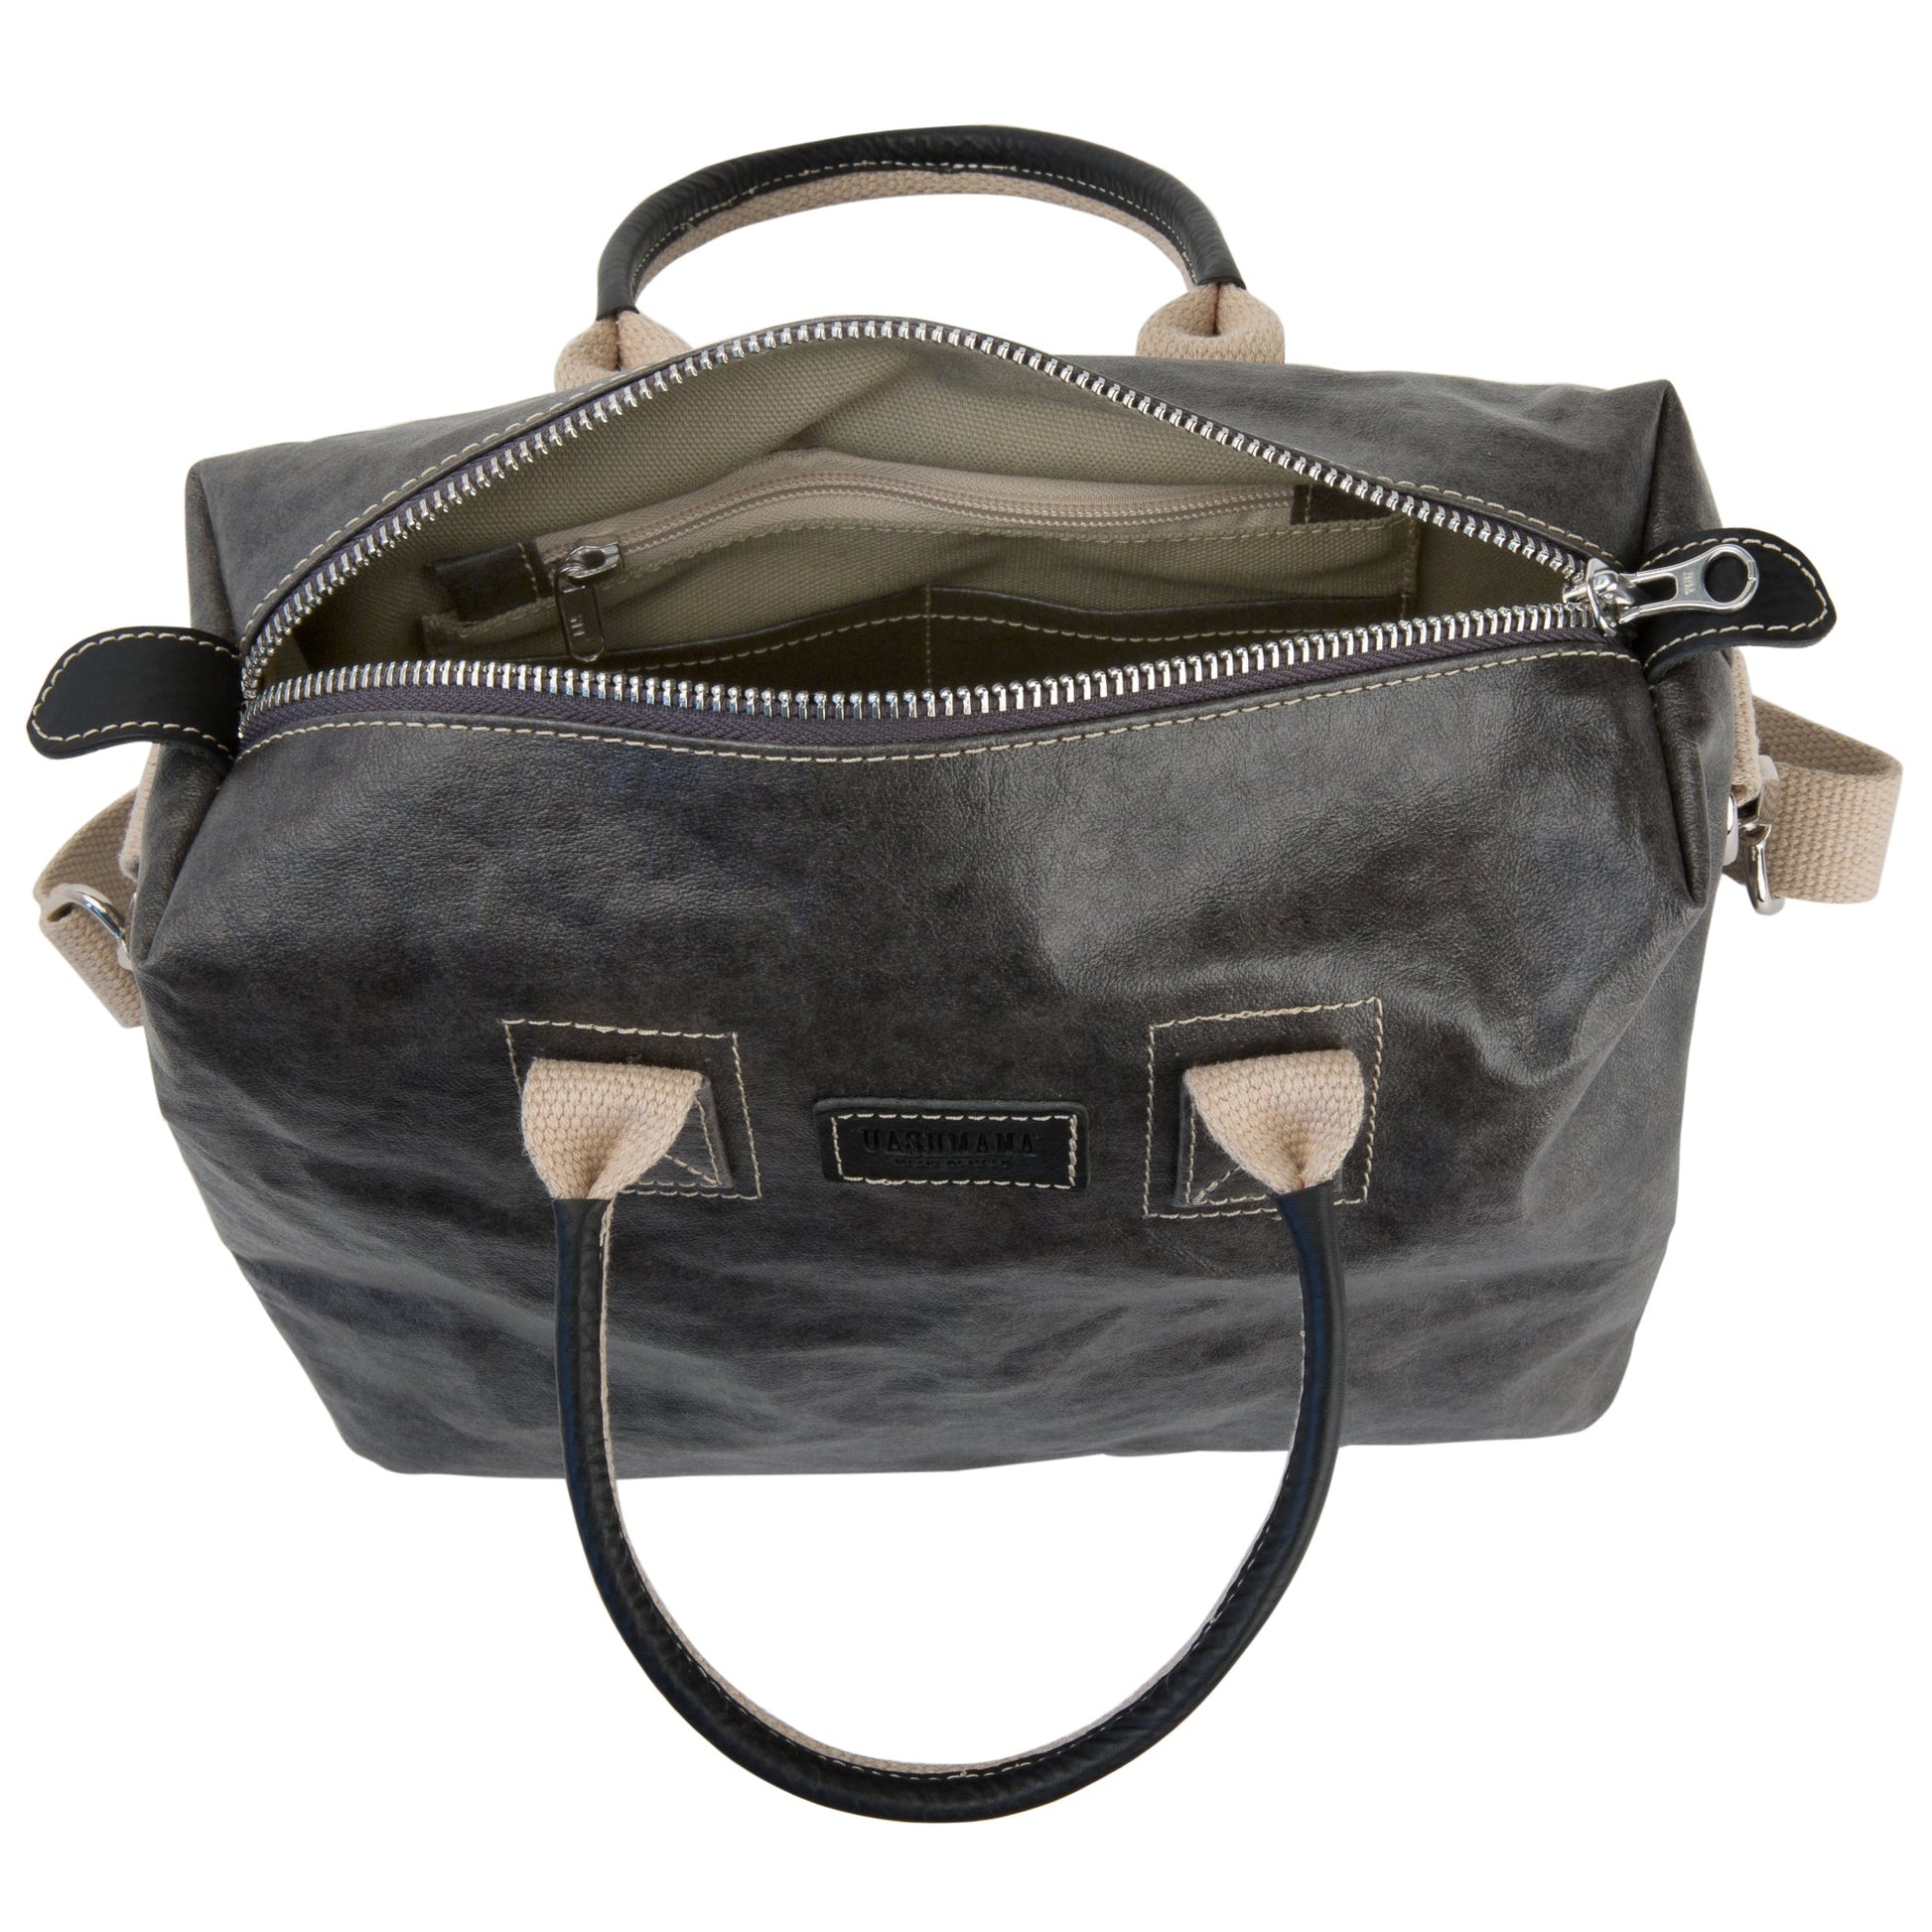 A small washable paper holdall is shown from above with the zip open. This shows an internal zipped pocket, two smaller pockets and organic cotton lining. The bag has two recycled cotton carry handles and a recycled cotton shoulder strap. The bag shown is dark grey.